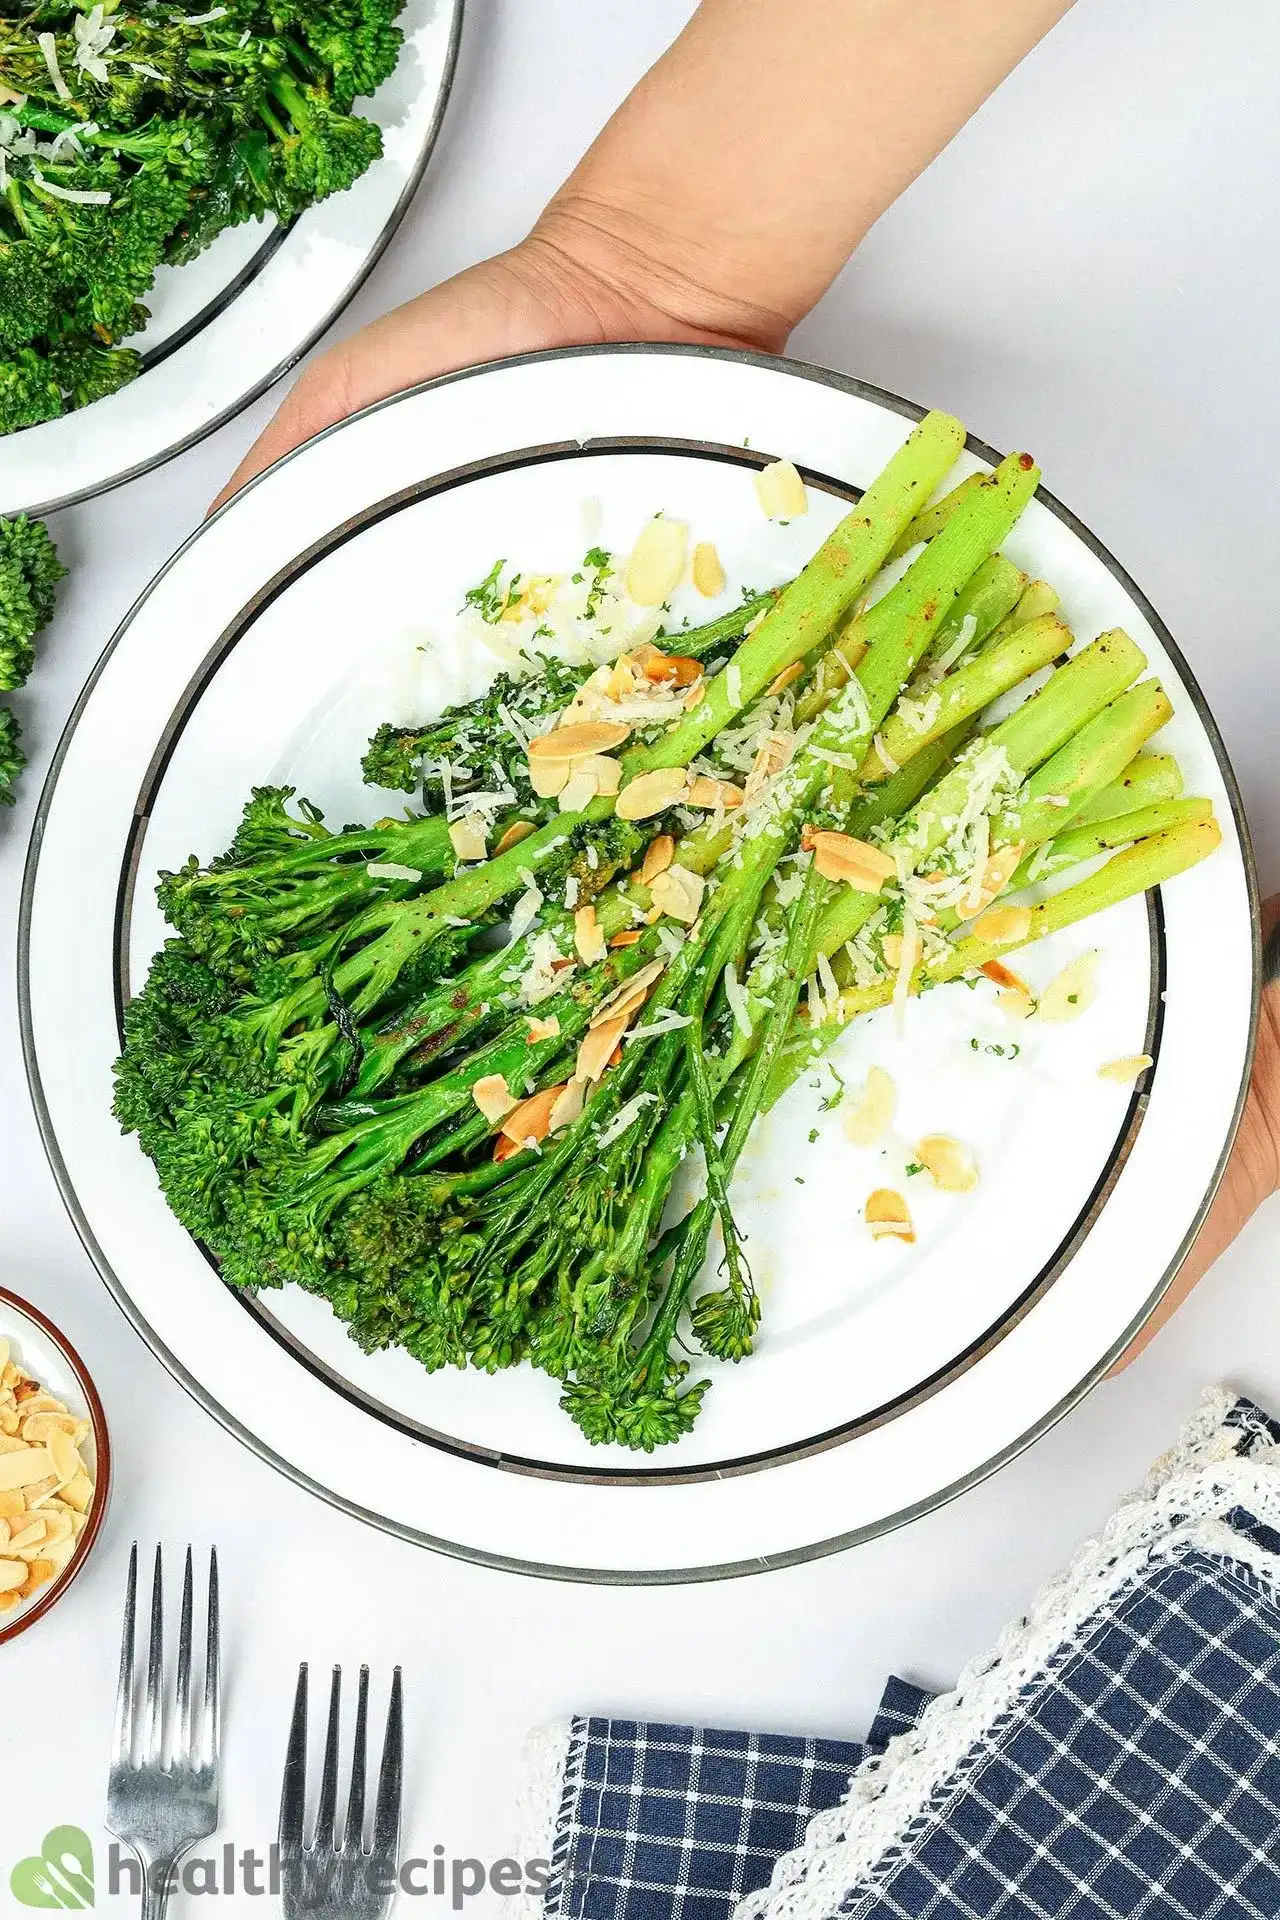 Roasted Baby Broccoli Recipe: An Exciting Way to Enjoy Broccoli